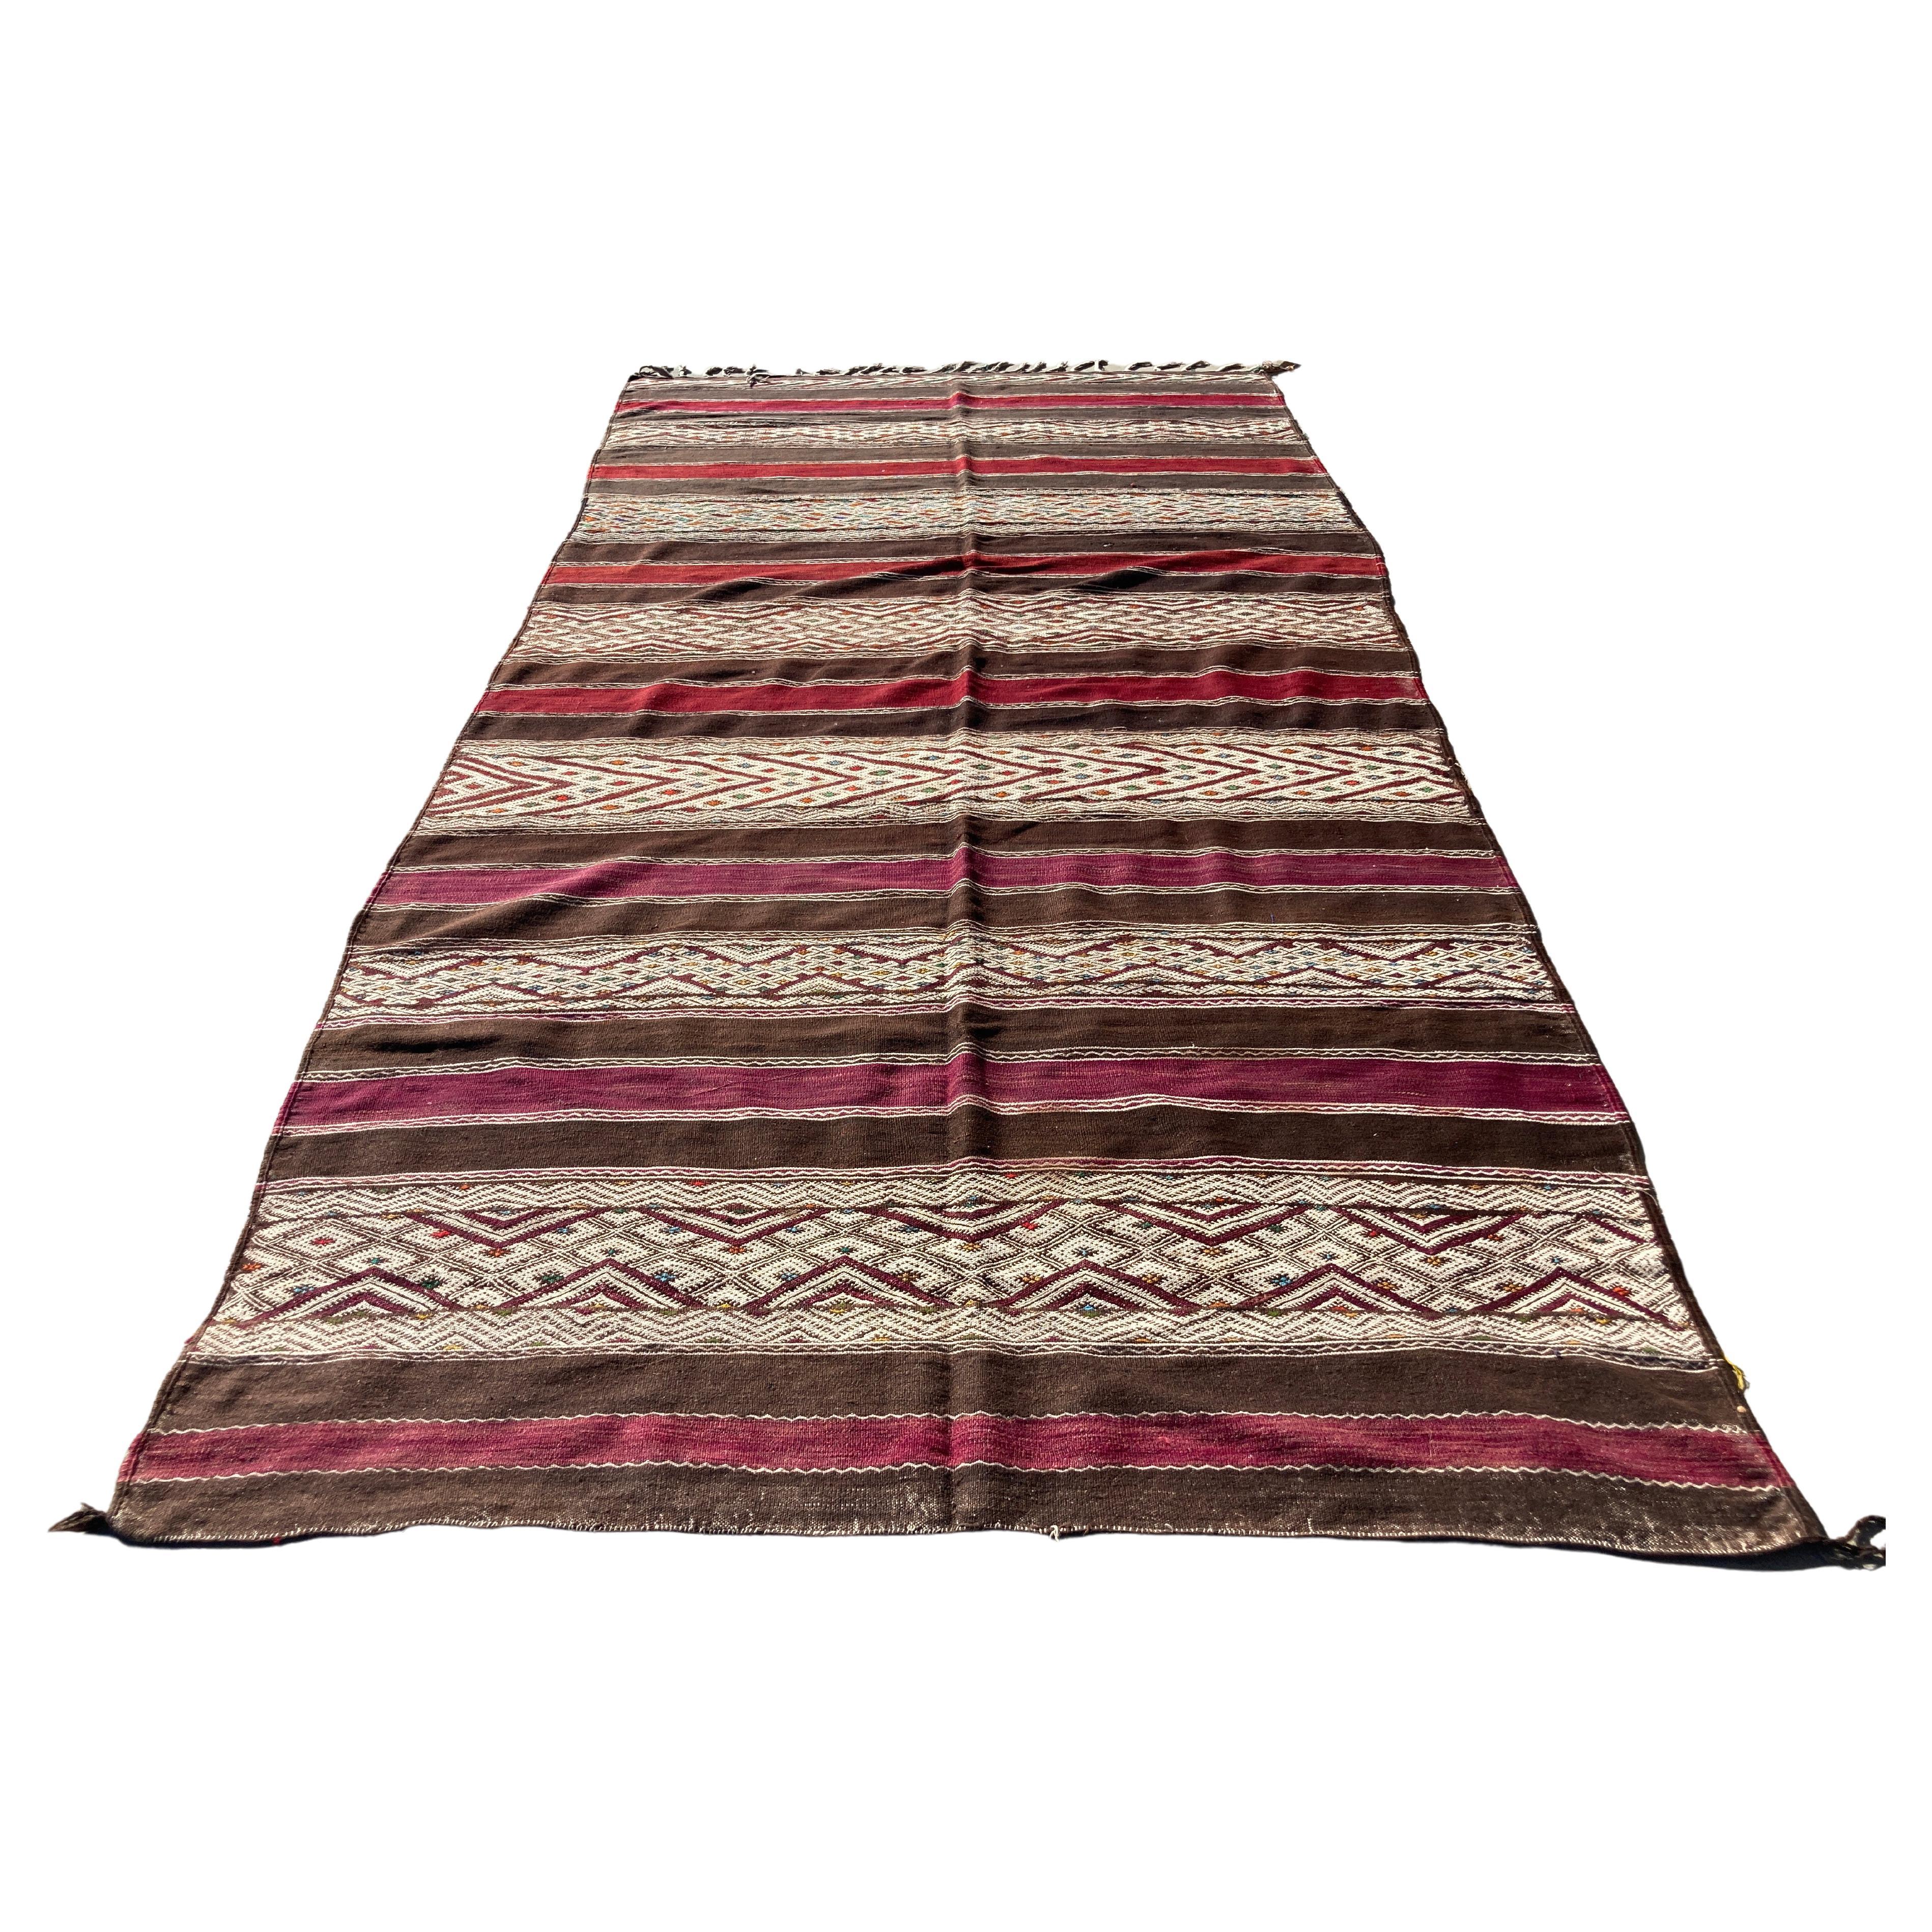 Moroccan authentic vintage flat-woven Tribal Kilim rug from the Middle Atlas of Morocco, North Africa. Handwoven clectible Moroccan textile in stripes of red and dark green, black and white geometrical Tribal African designs. Each carpet is a unique